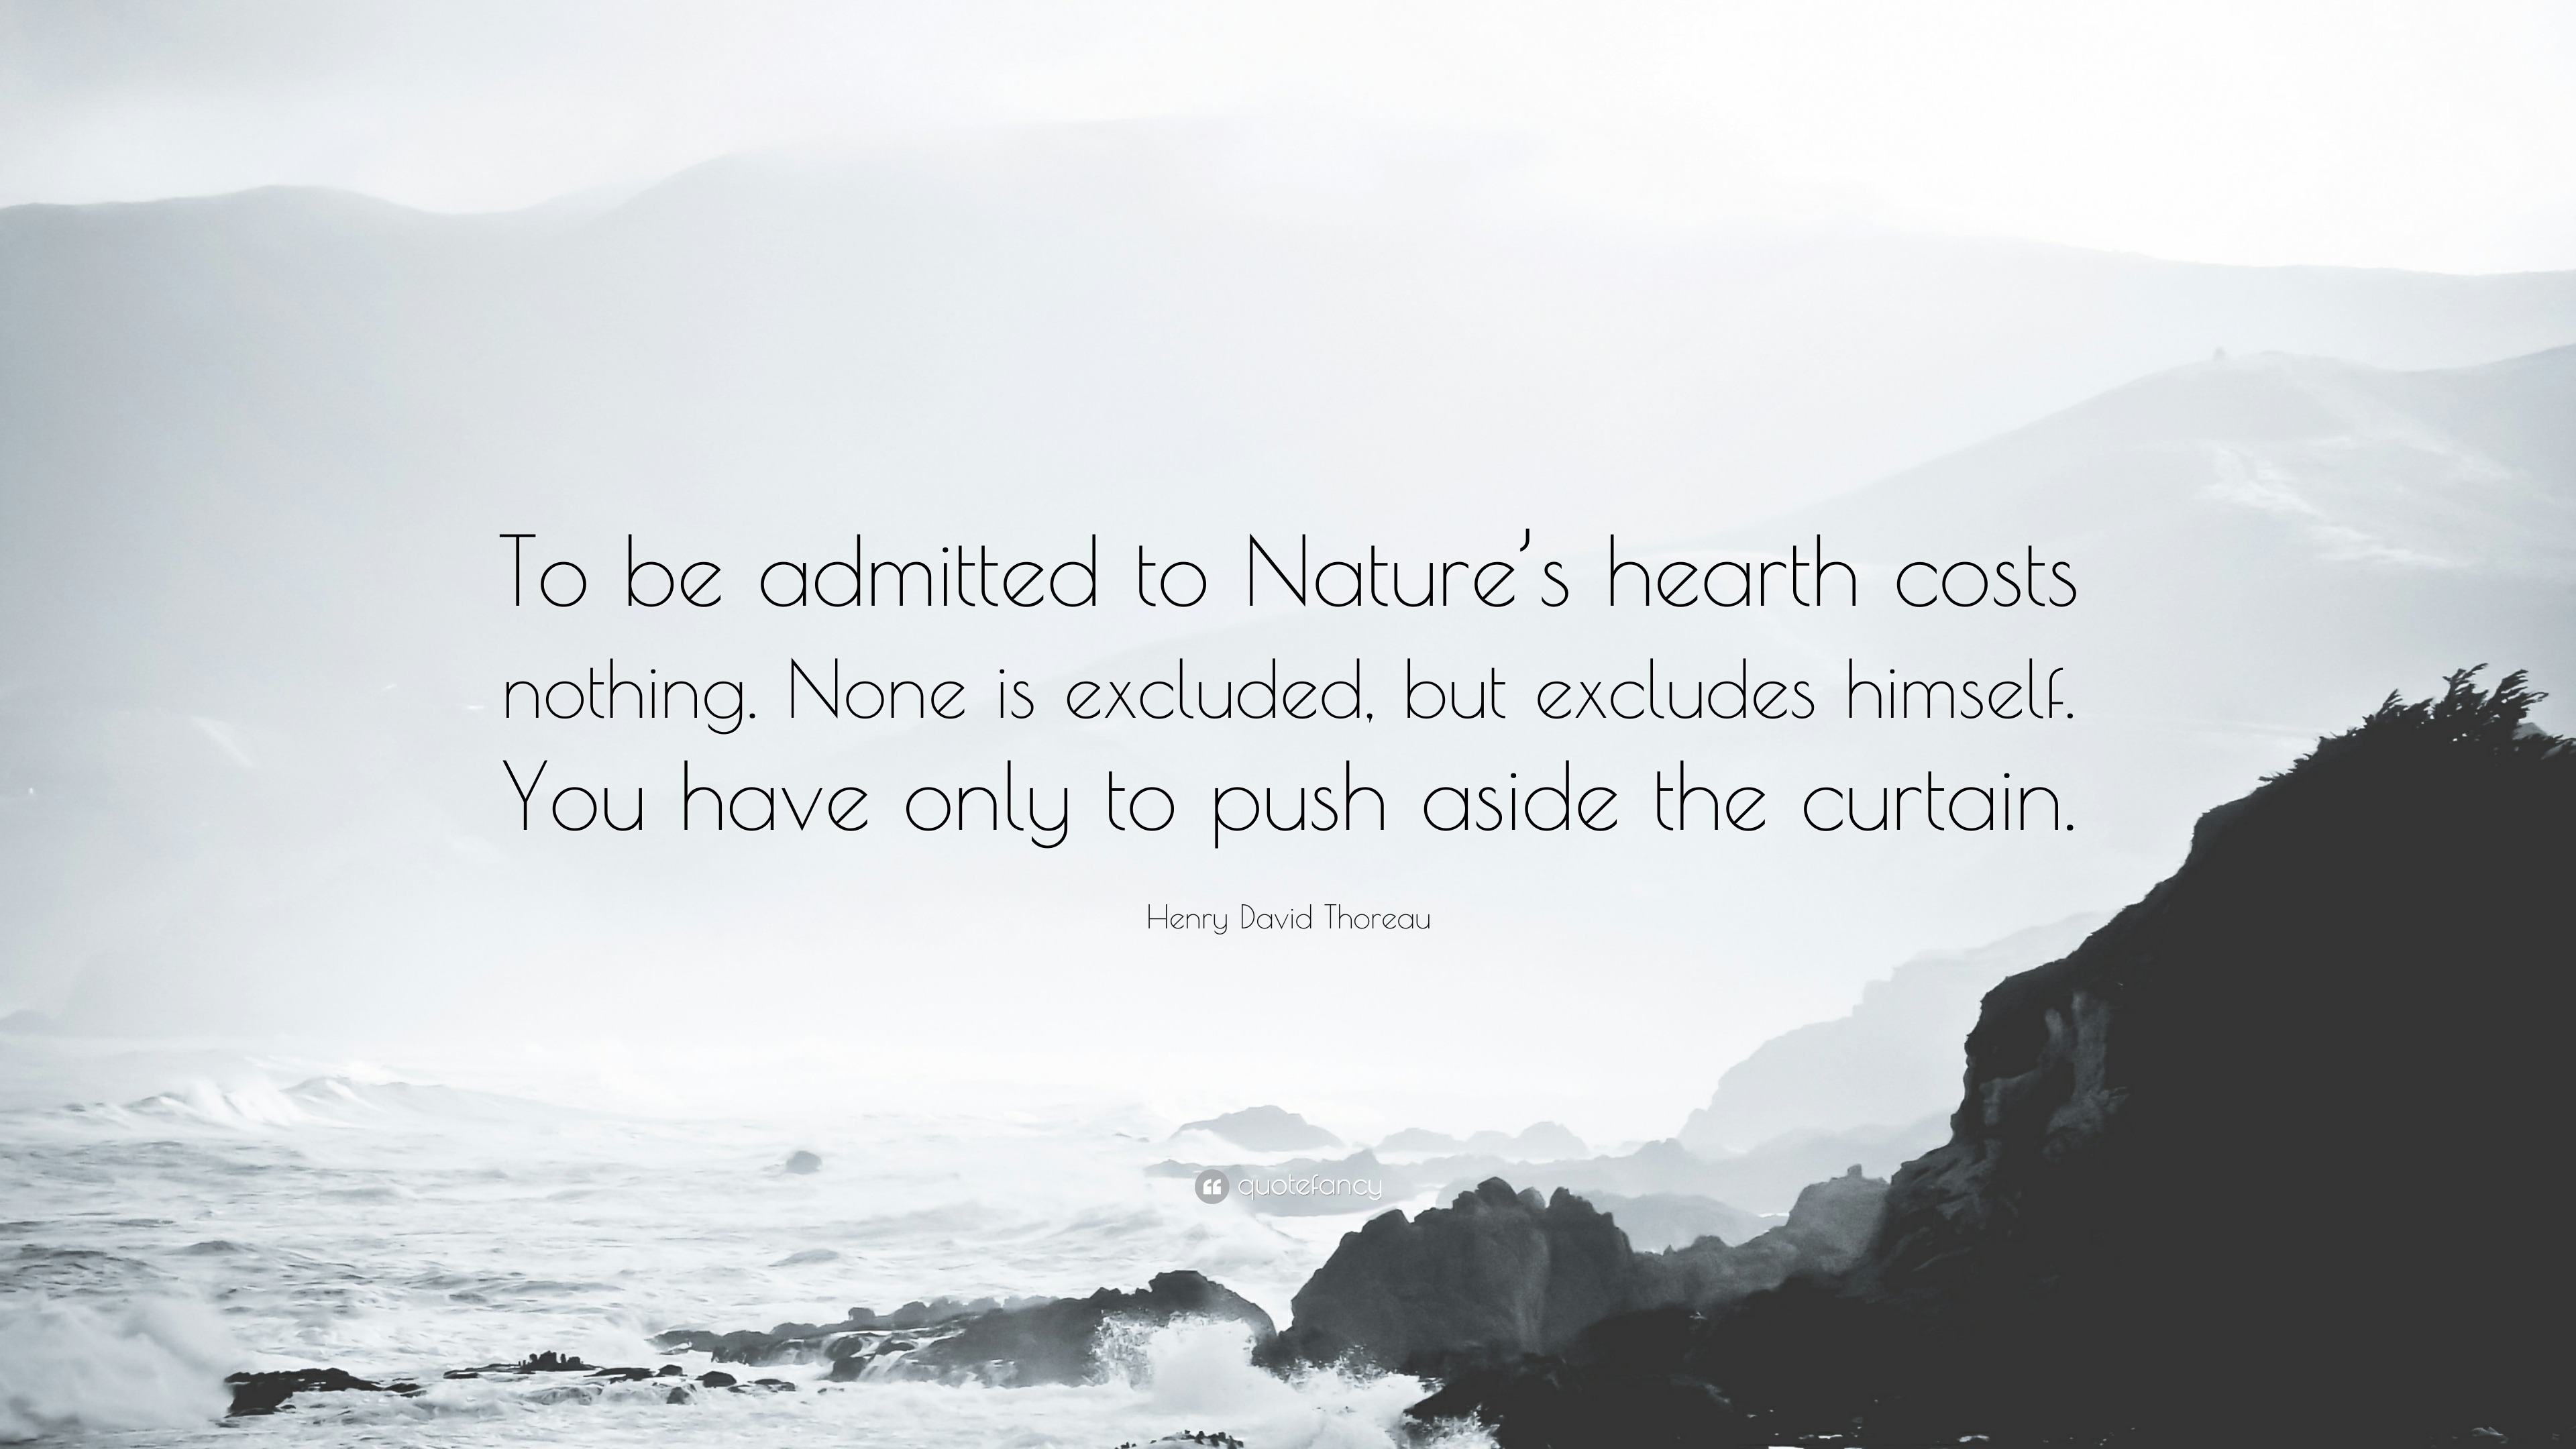 Henry David Thoreau Quote: “To be admitted to Nature's hearth